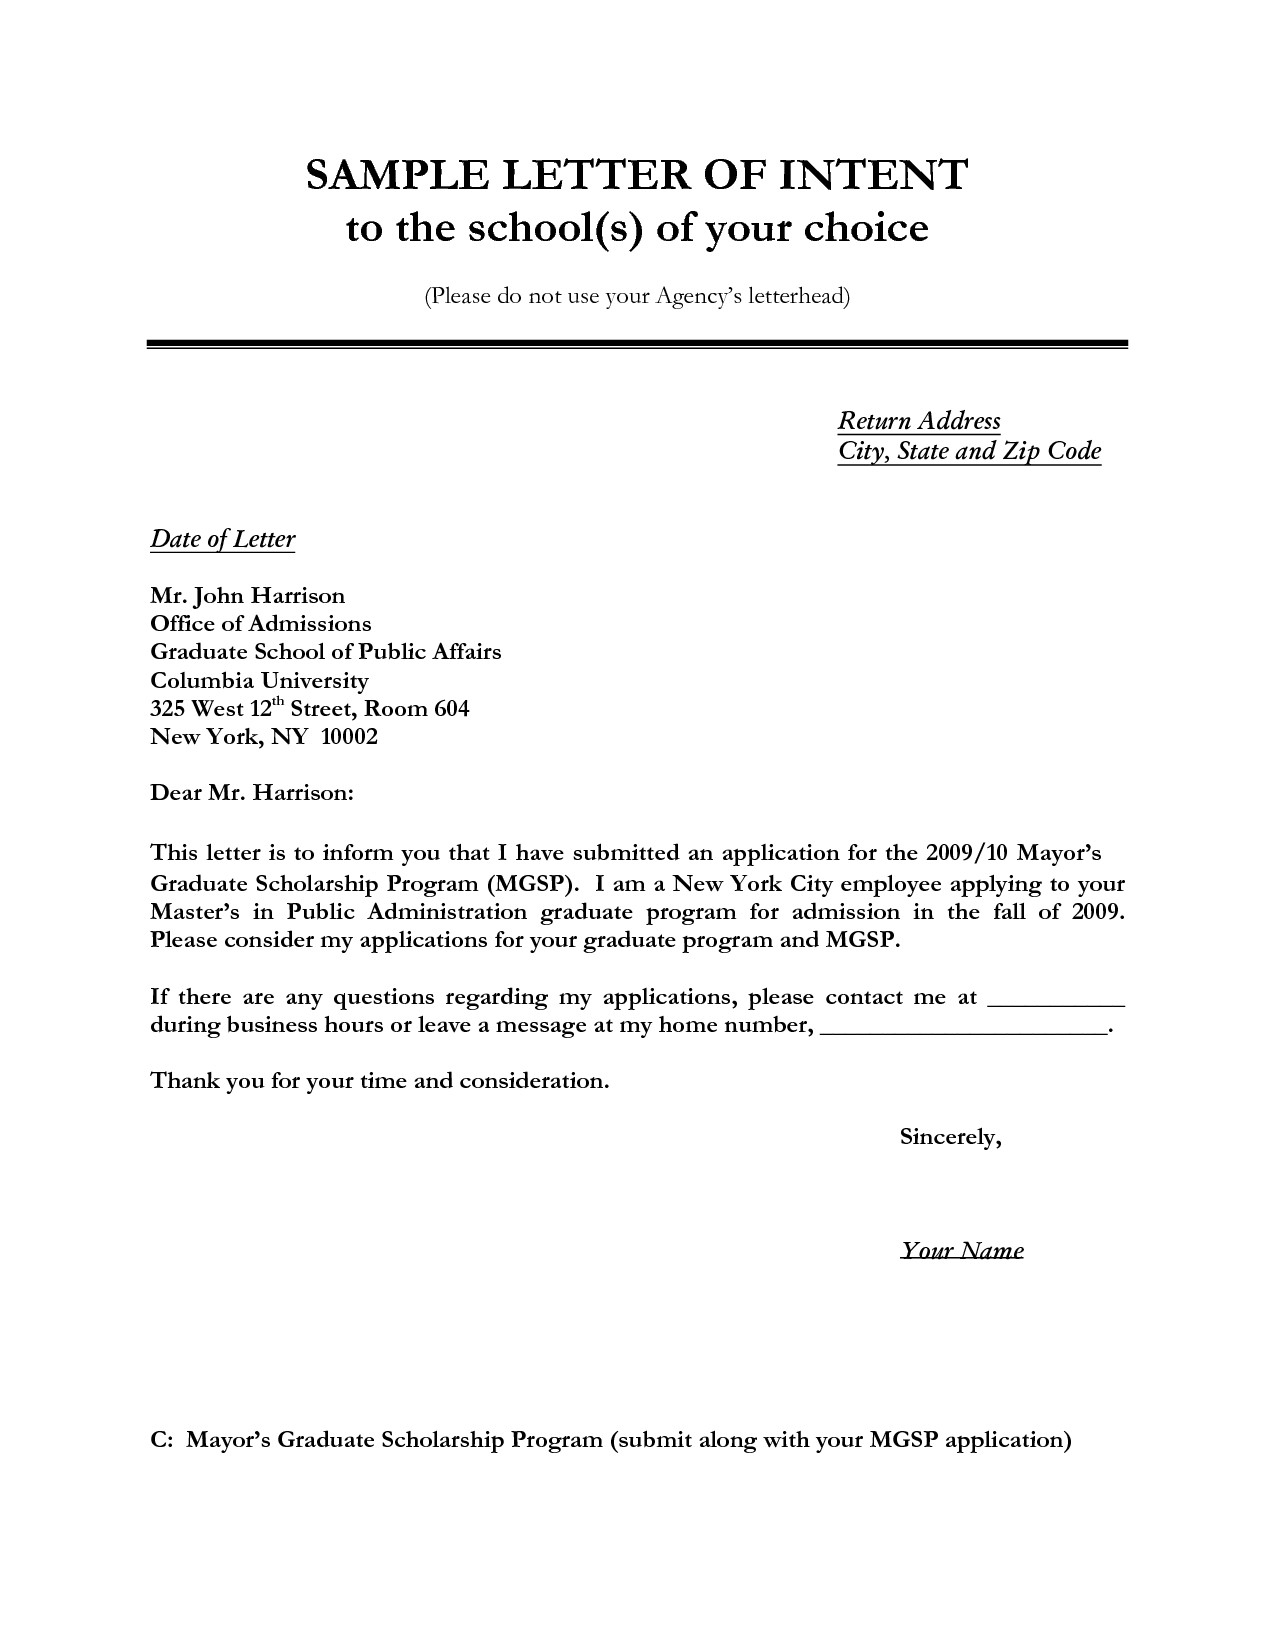 General Contractor Warranty Letter Template - Breach Contract Claim Fresh Letter Intent Sample